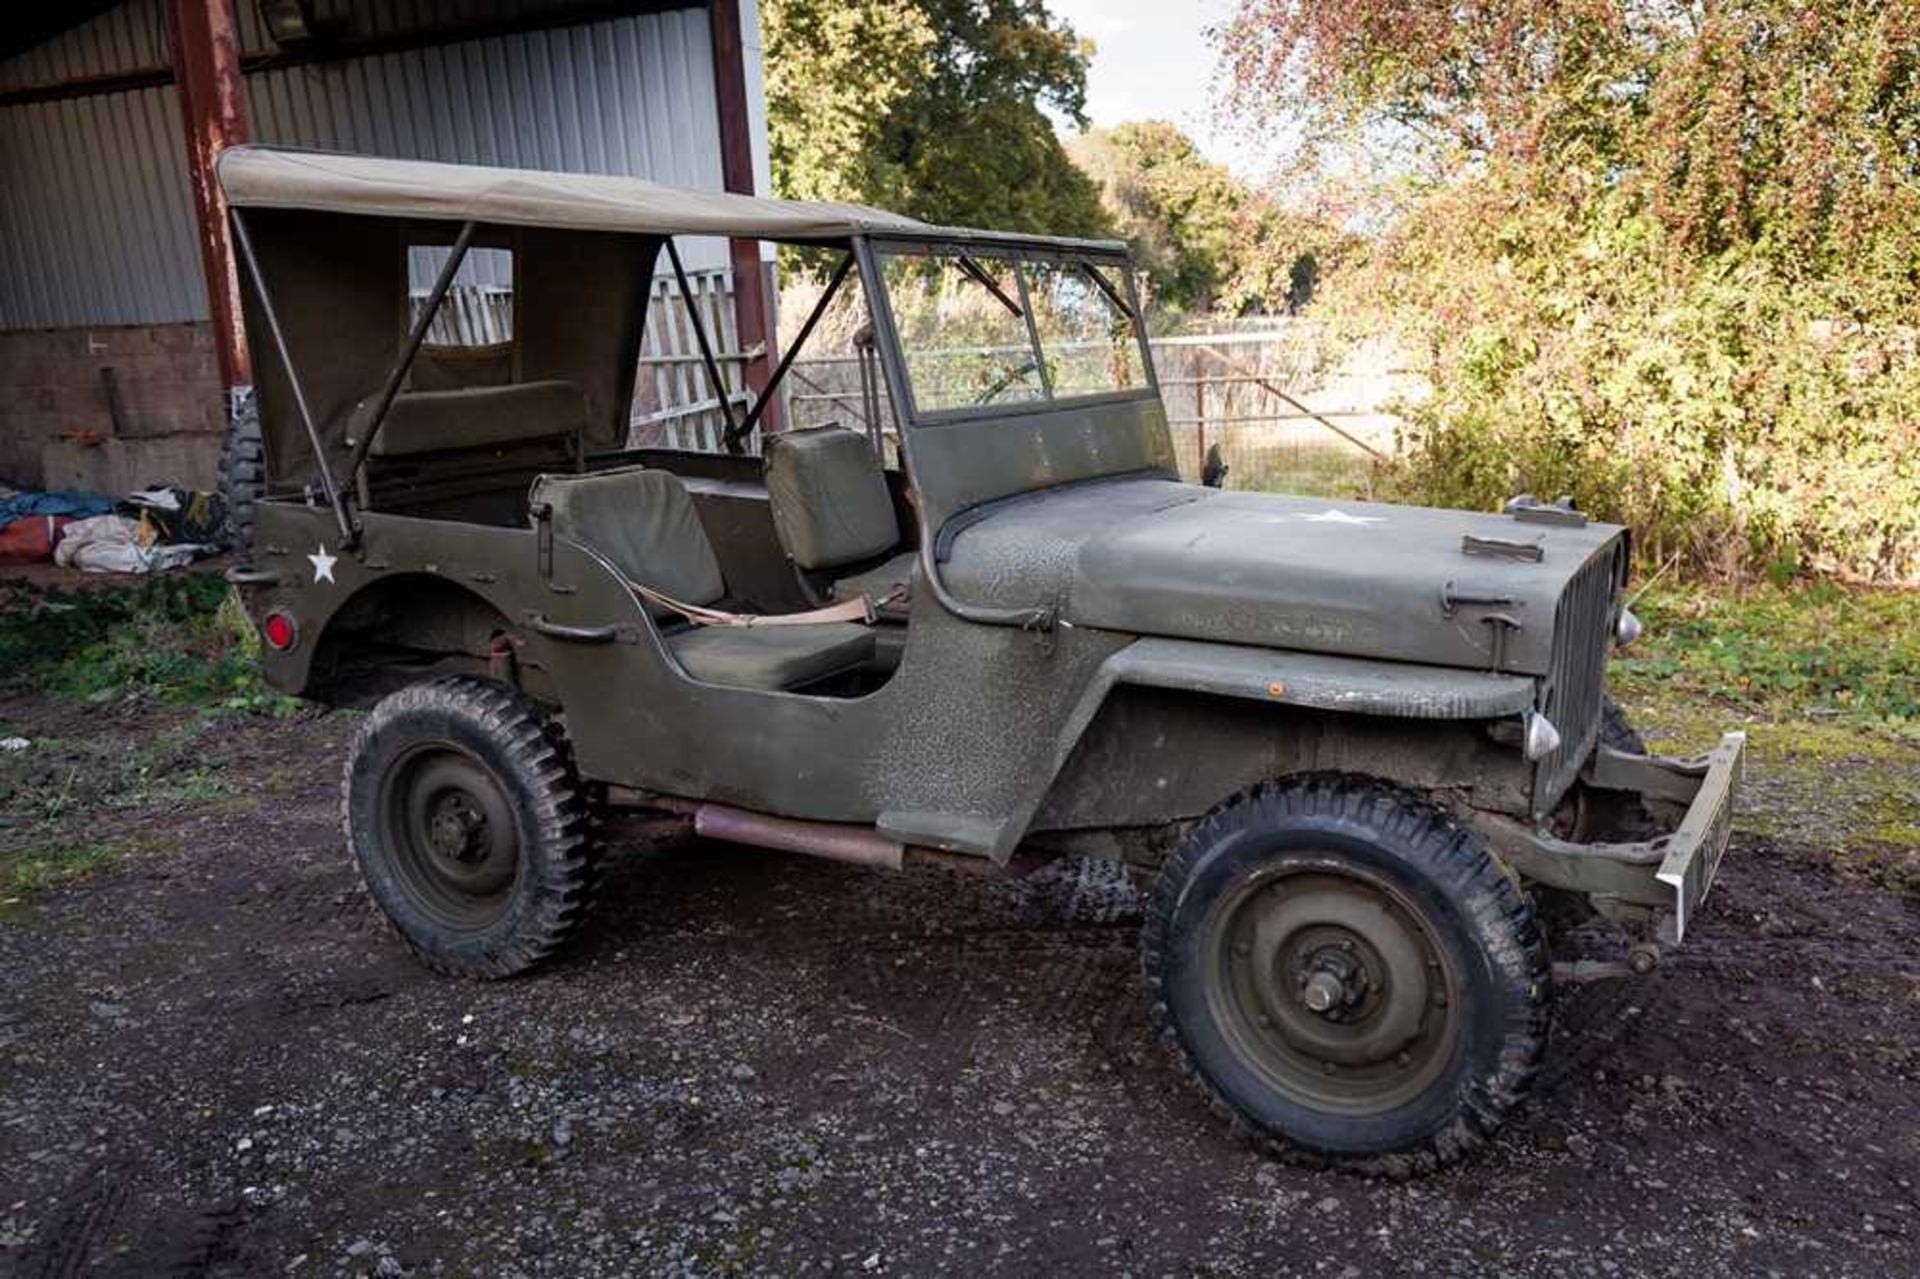 1943 Ford GPW Jeep Formerly the Property of Oscar Winner Rex Harrison - Image 7 of 88